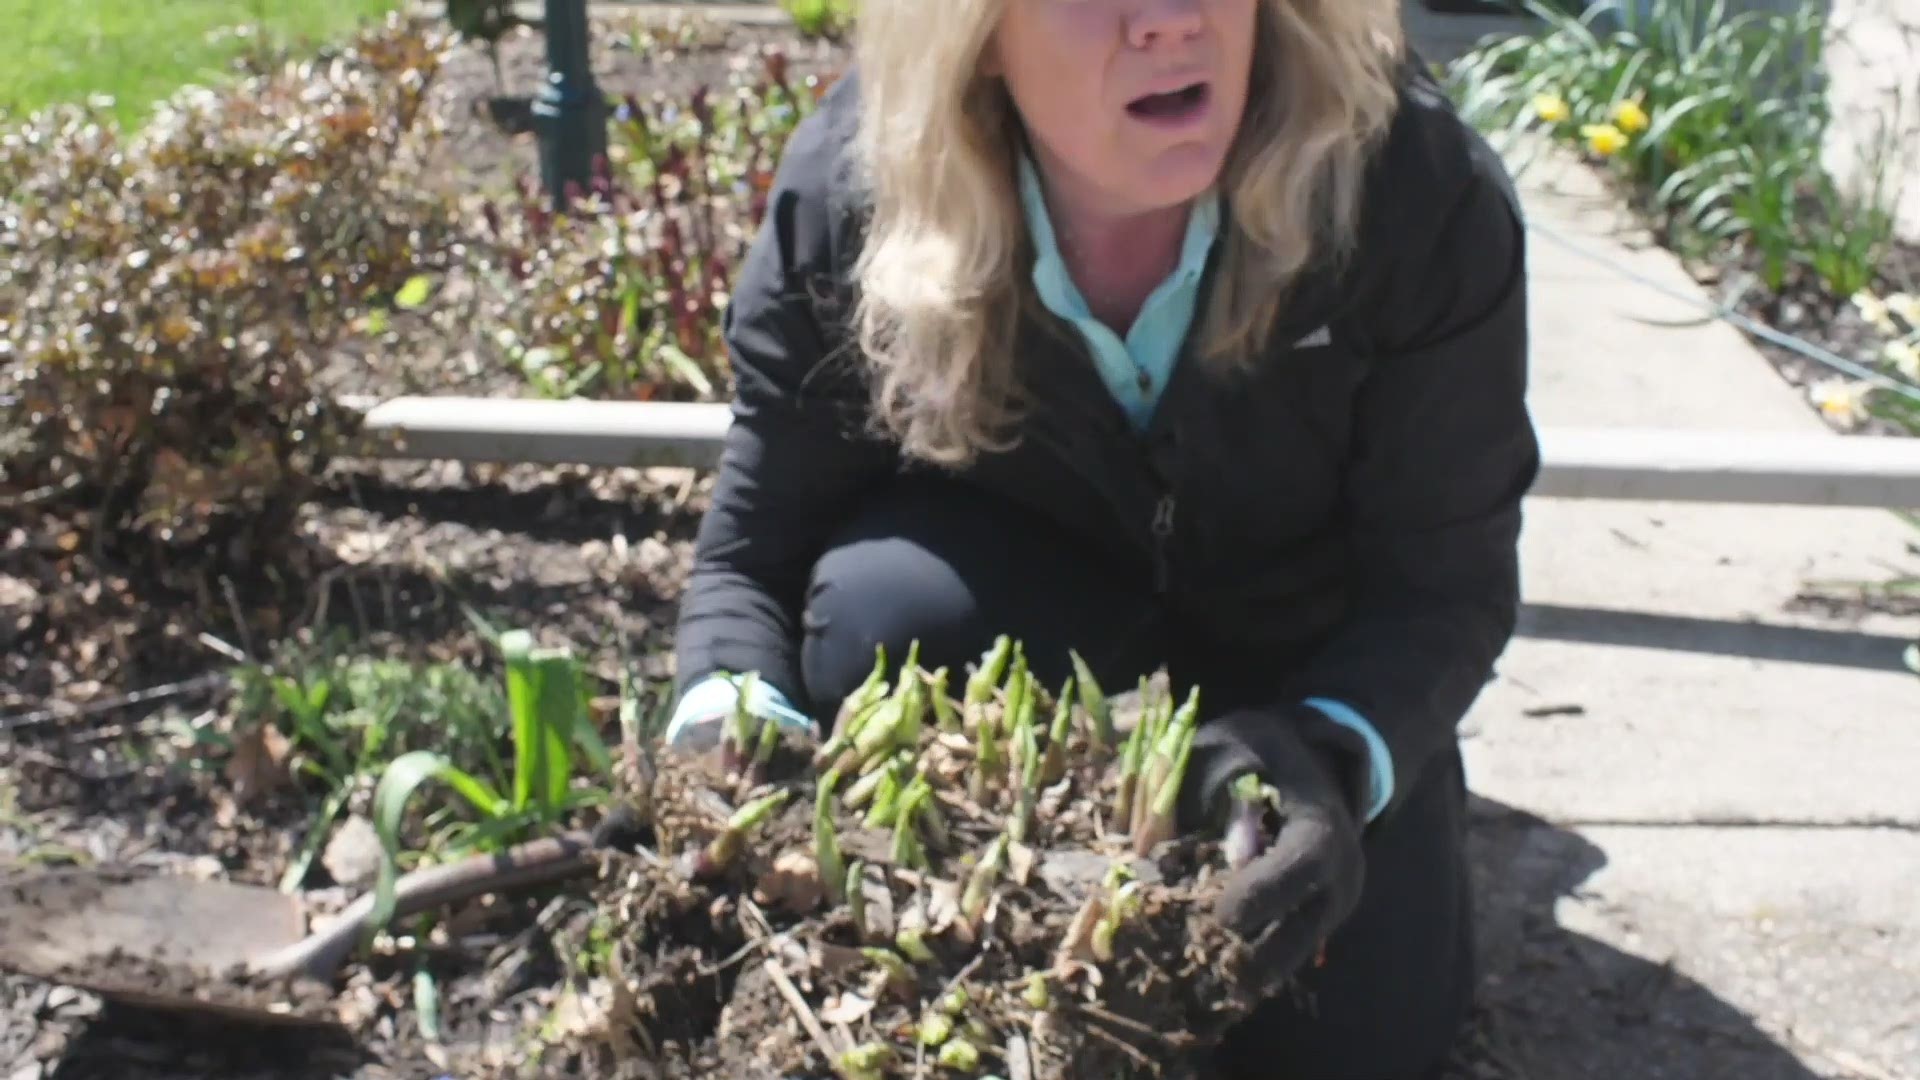 So, you've dug a hole ... what comes next? Check out these top tips for planting from Toledo Botanical Garden experts.